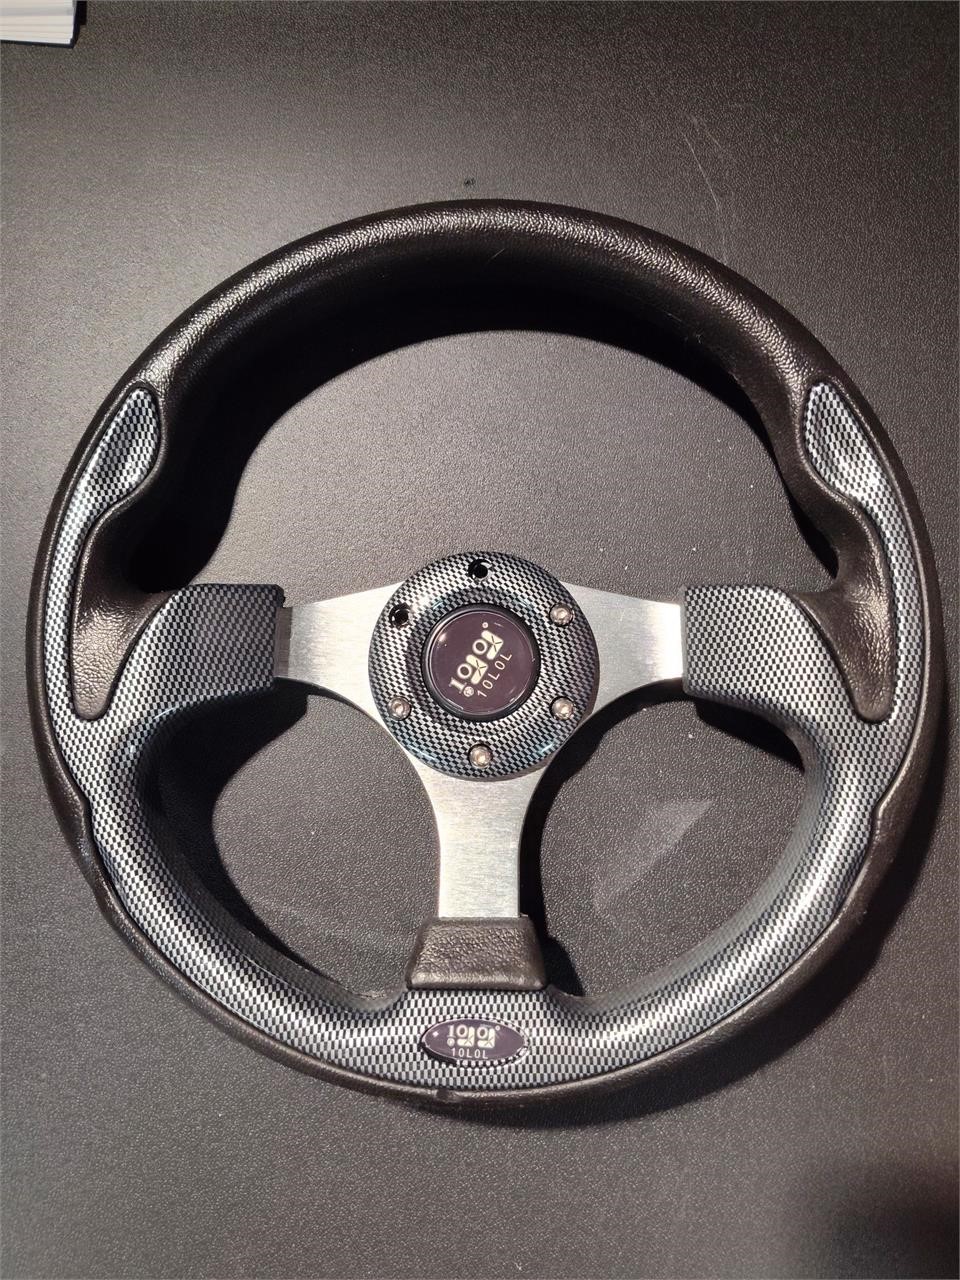 Steering Wheel for a Golf Cart